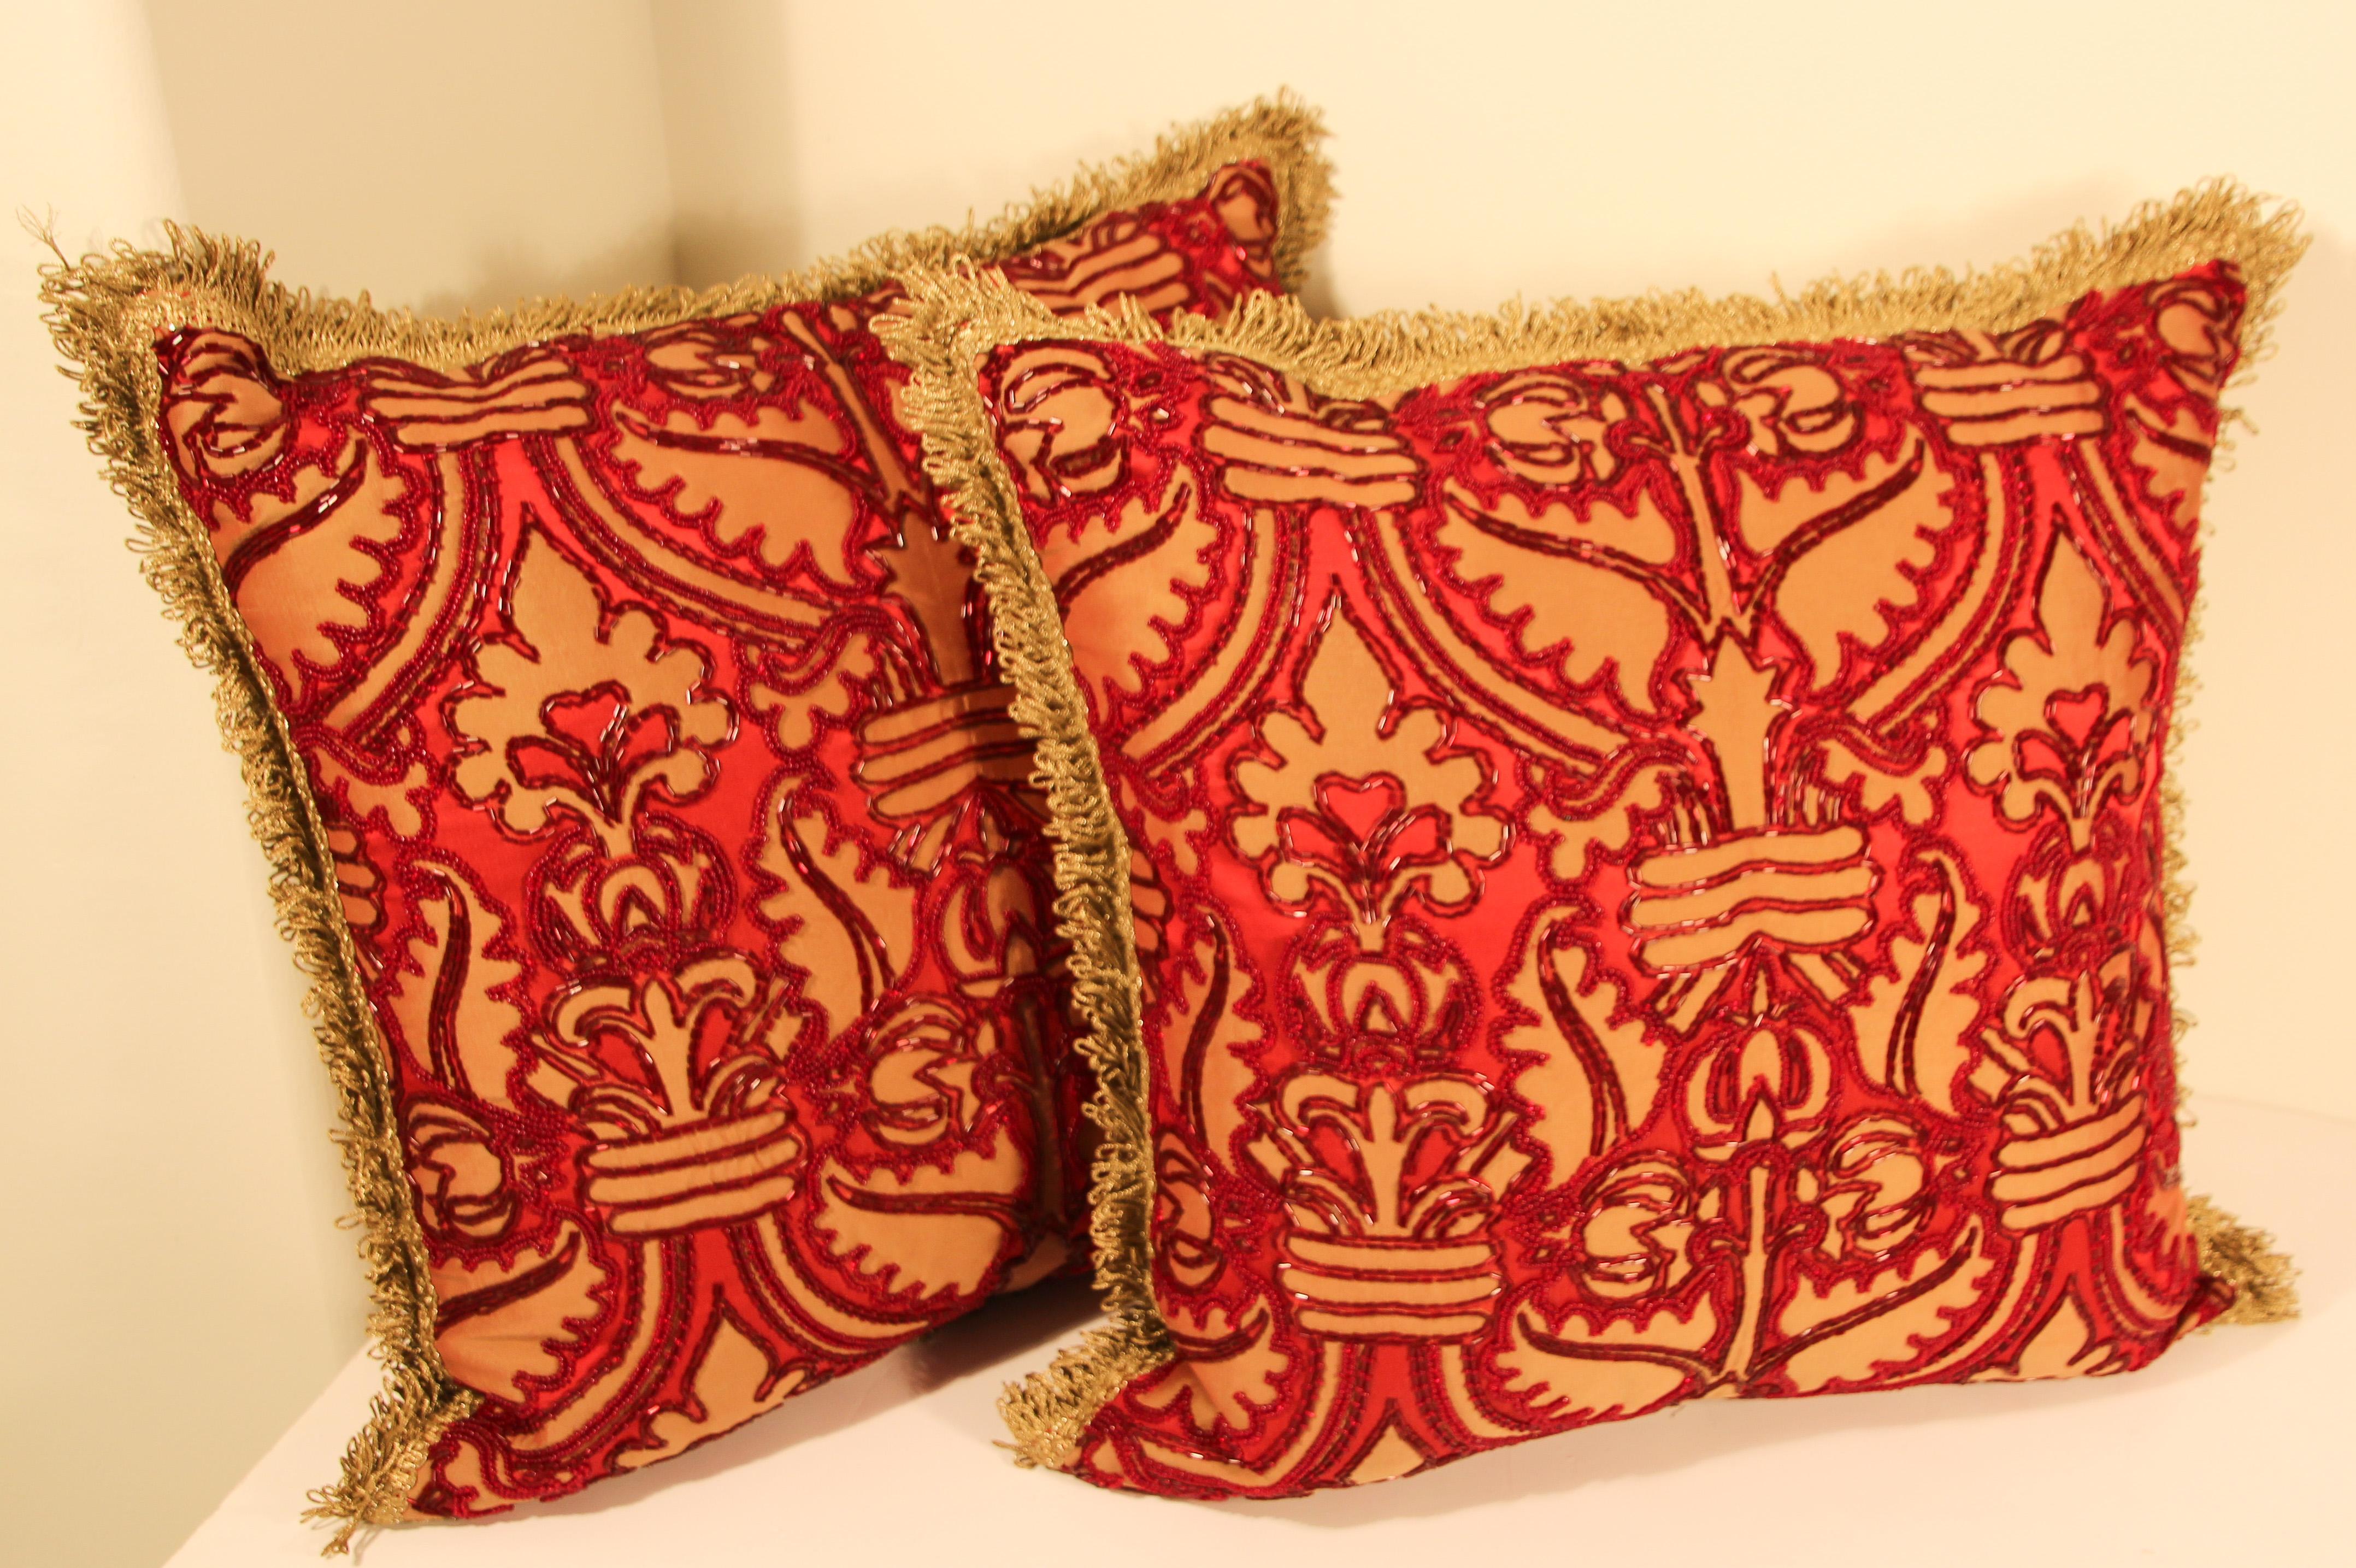 Pair of large handmade silk pillows with metallic threads and embroidered with rich metallic and red beads.
Goose down-and-feather inserts filled and only a pair available, custom made.
Handcrafted by Morison and Company, one of a kind numbered.